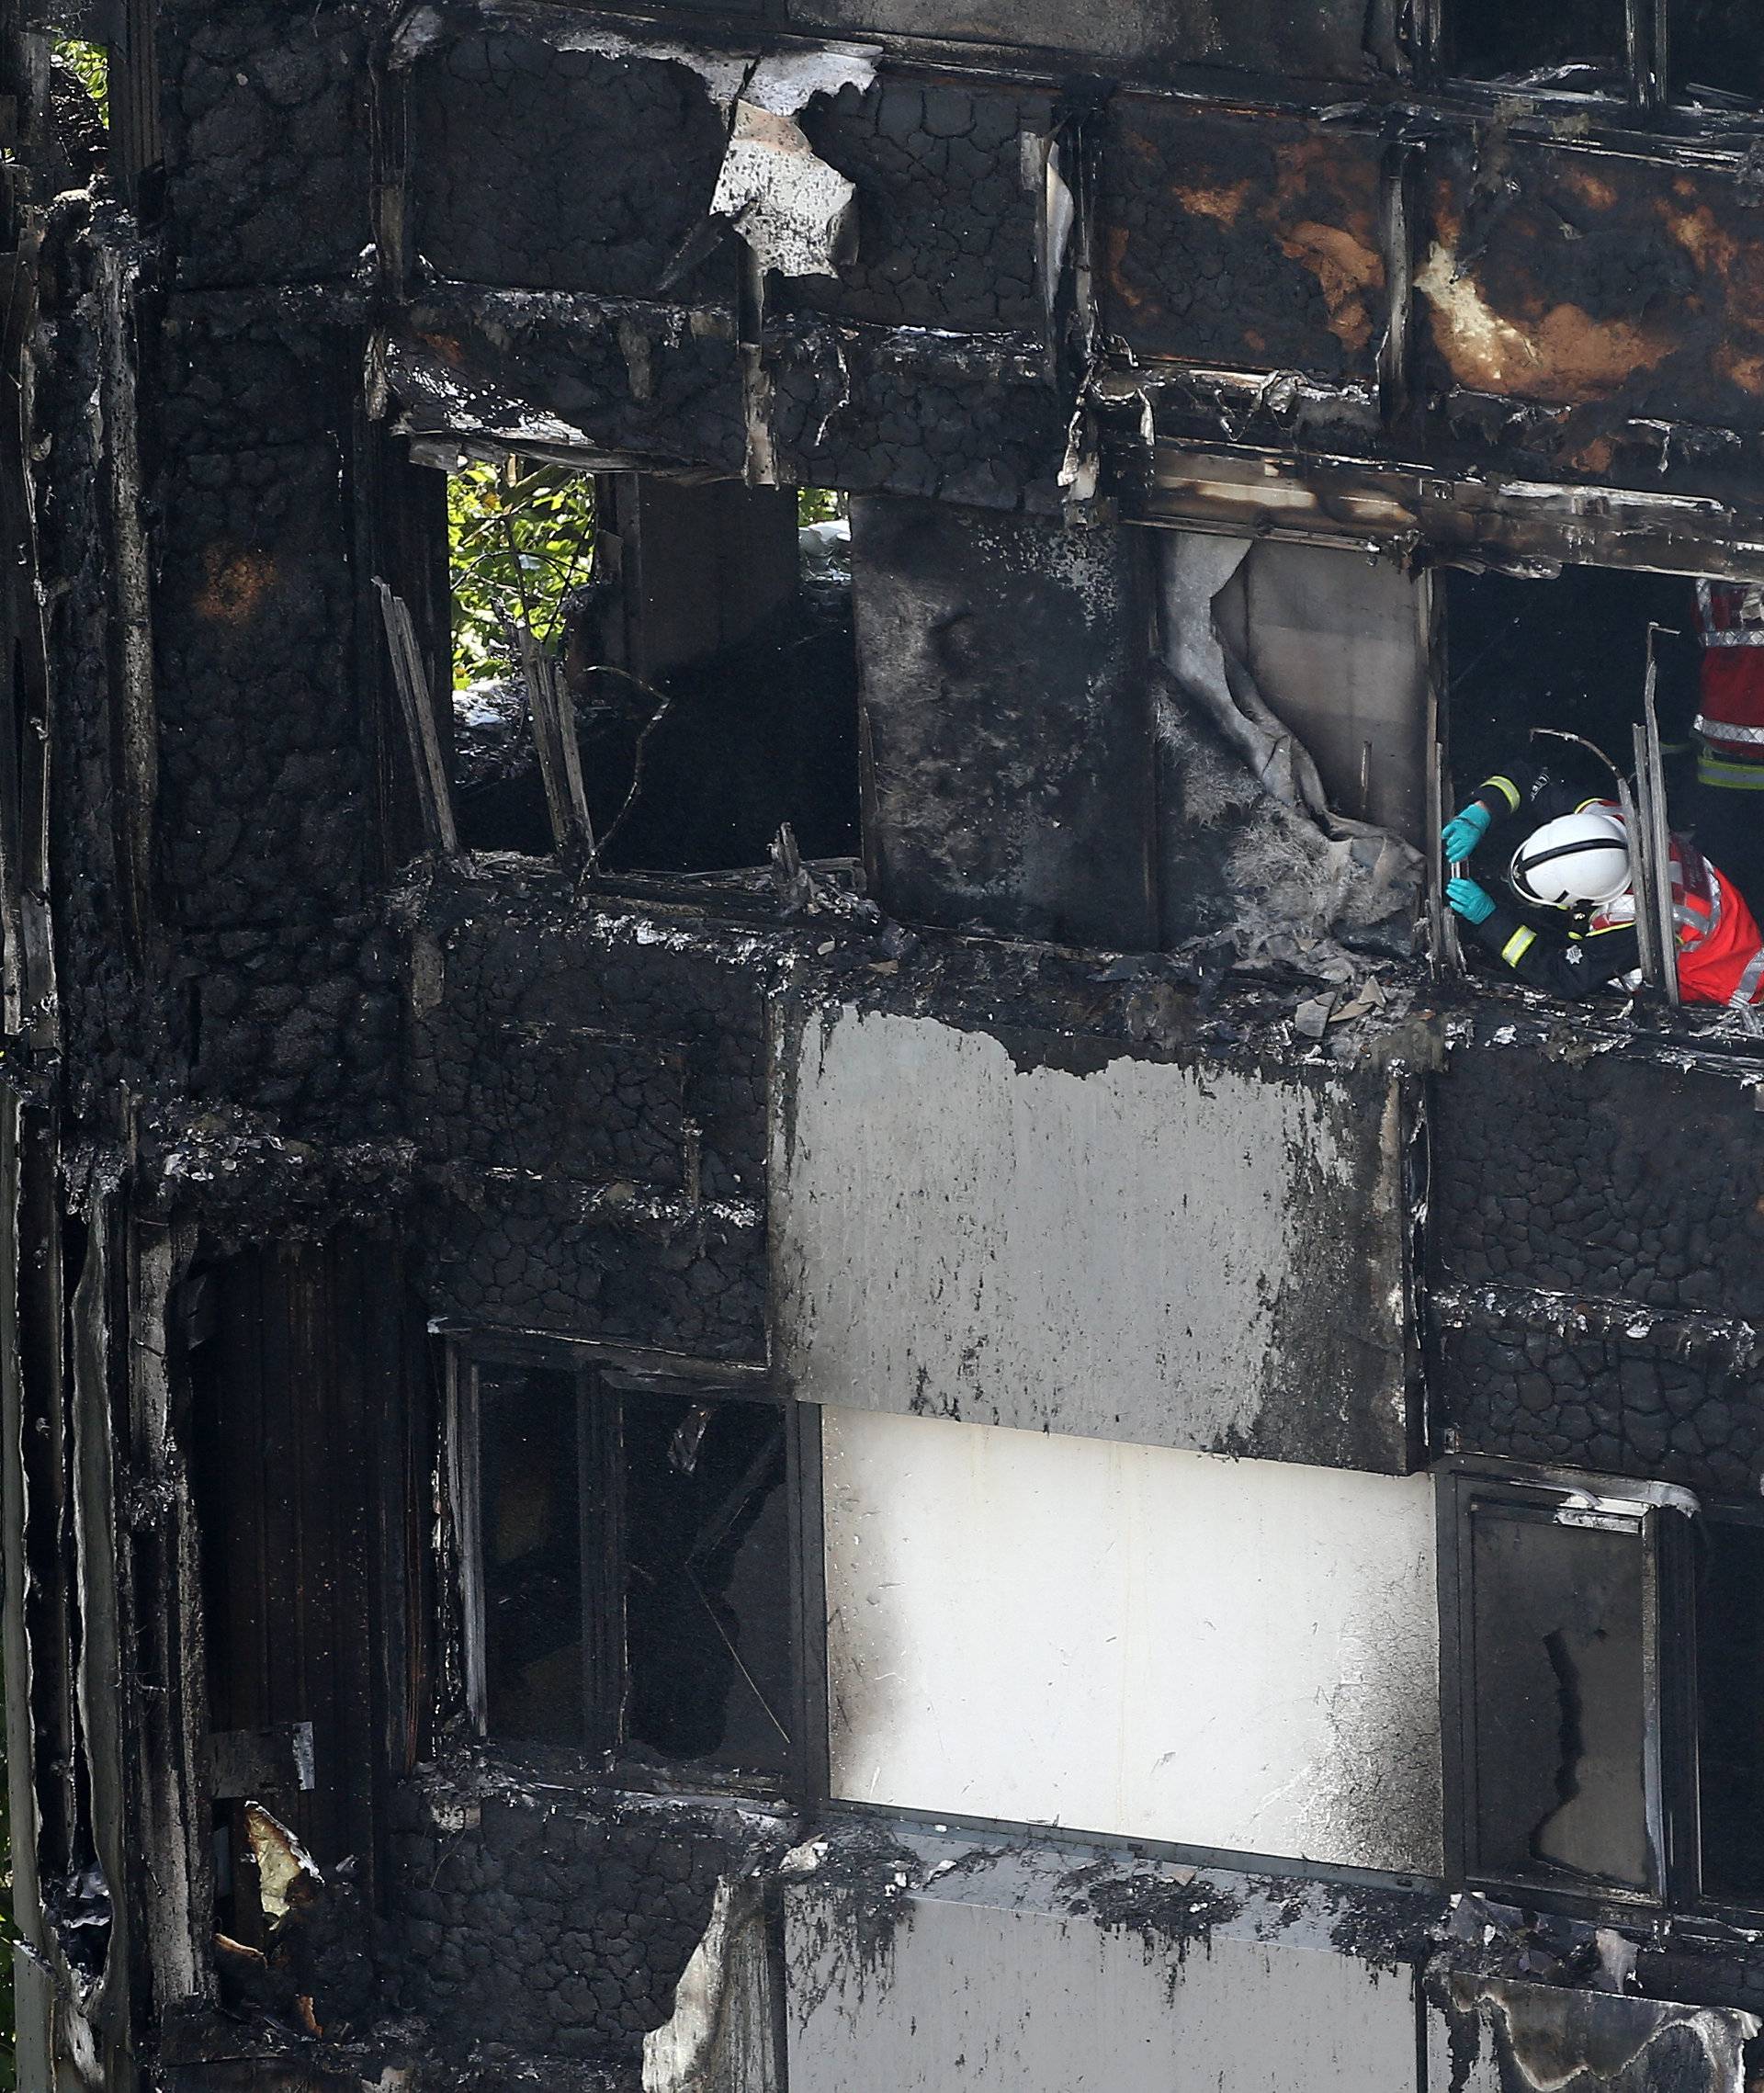 A firefighter examines material in a tower block severely damaged by a serious fire, in north Kensington, West London